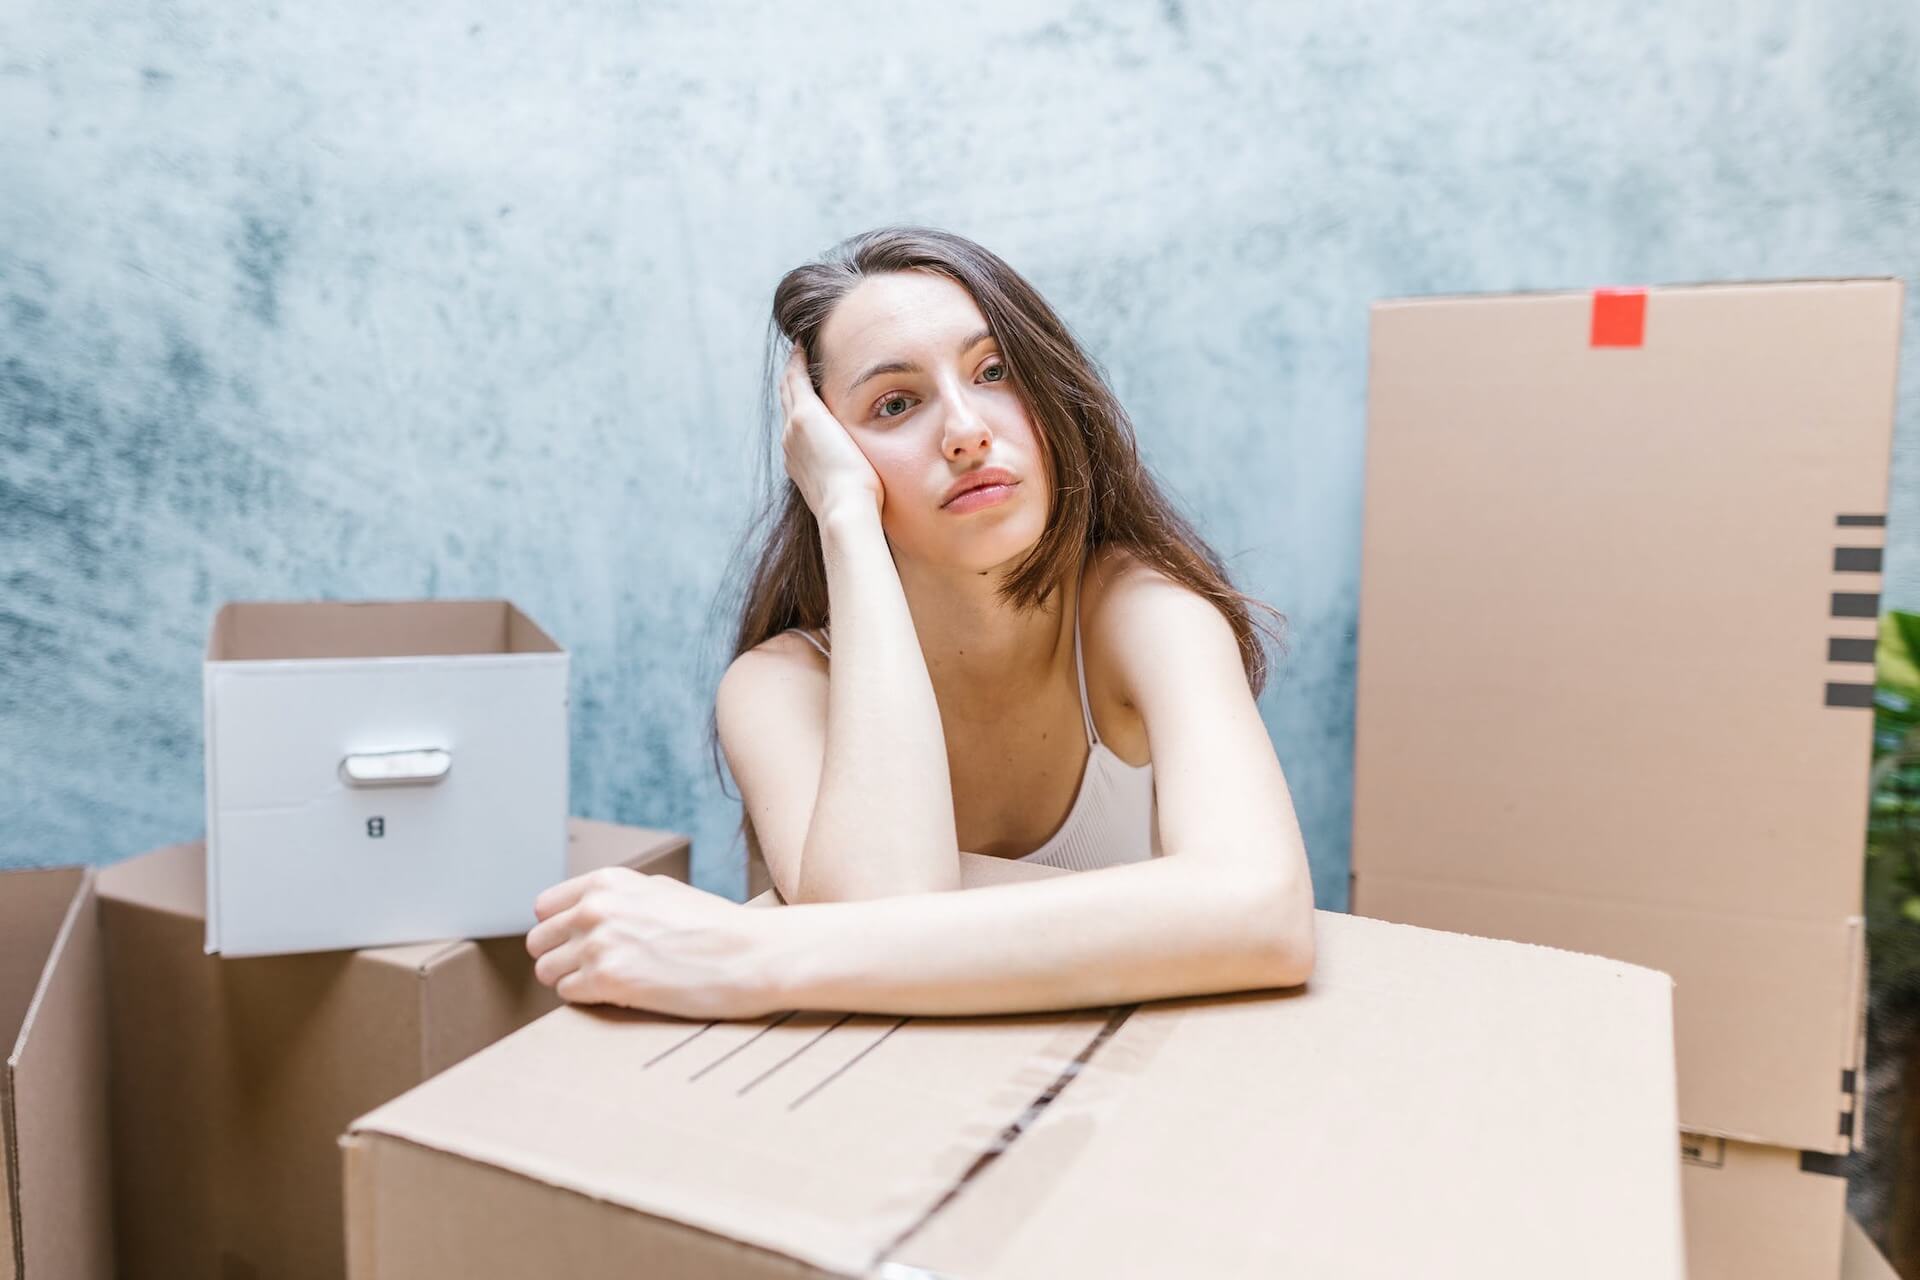 A worried woman leaning on a box